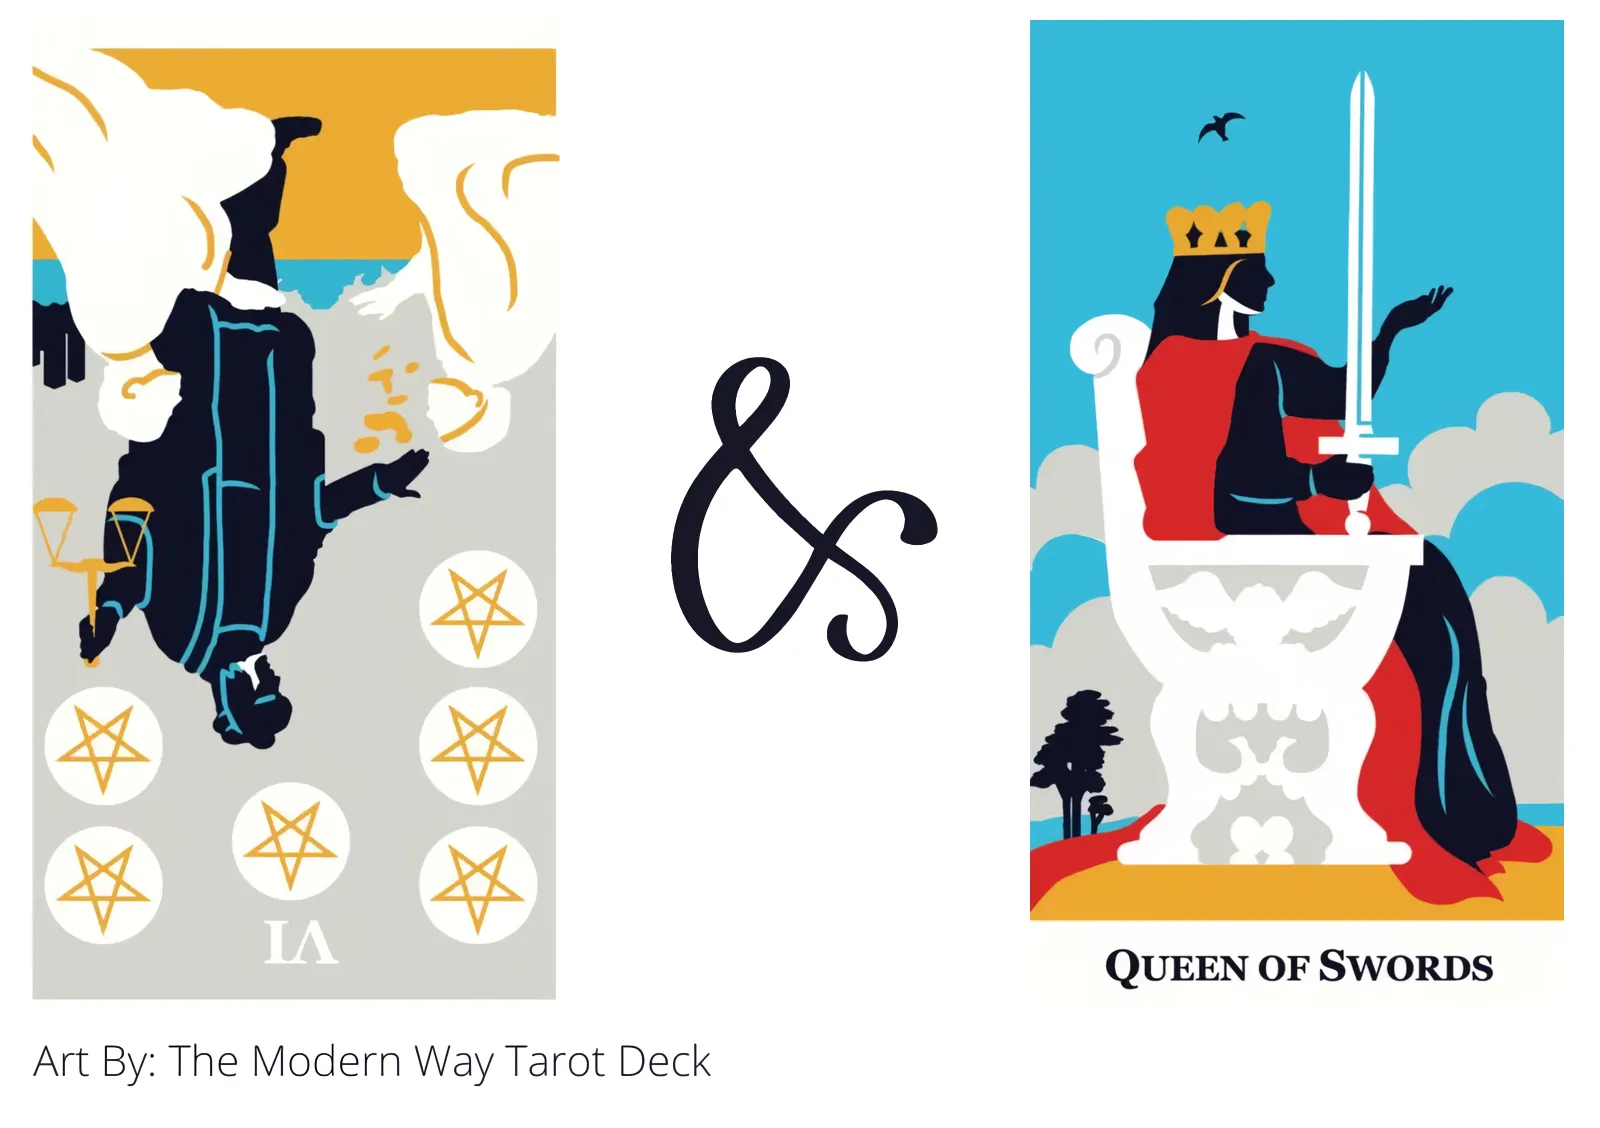 six of pentacles reversed and queen of swords tarot cards together